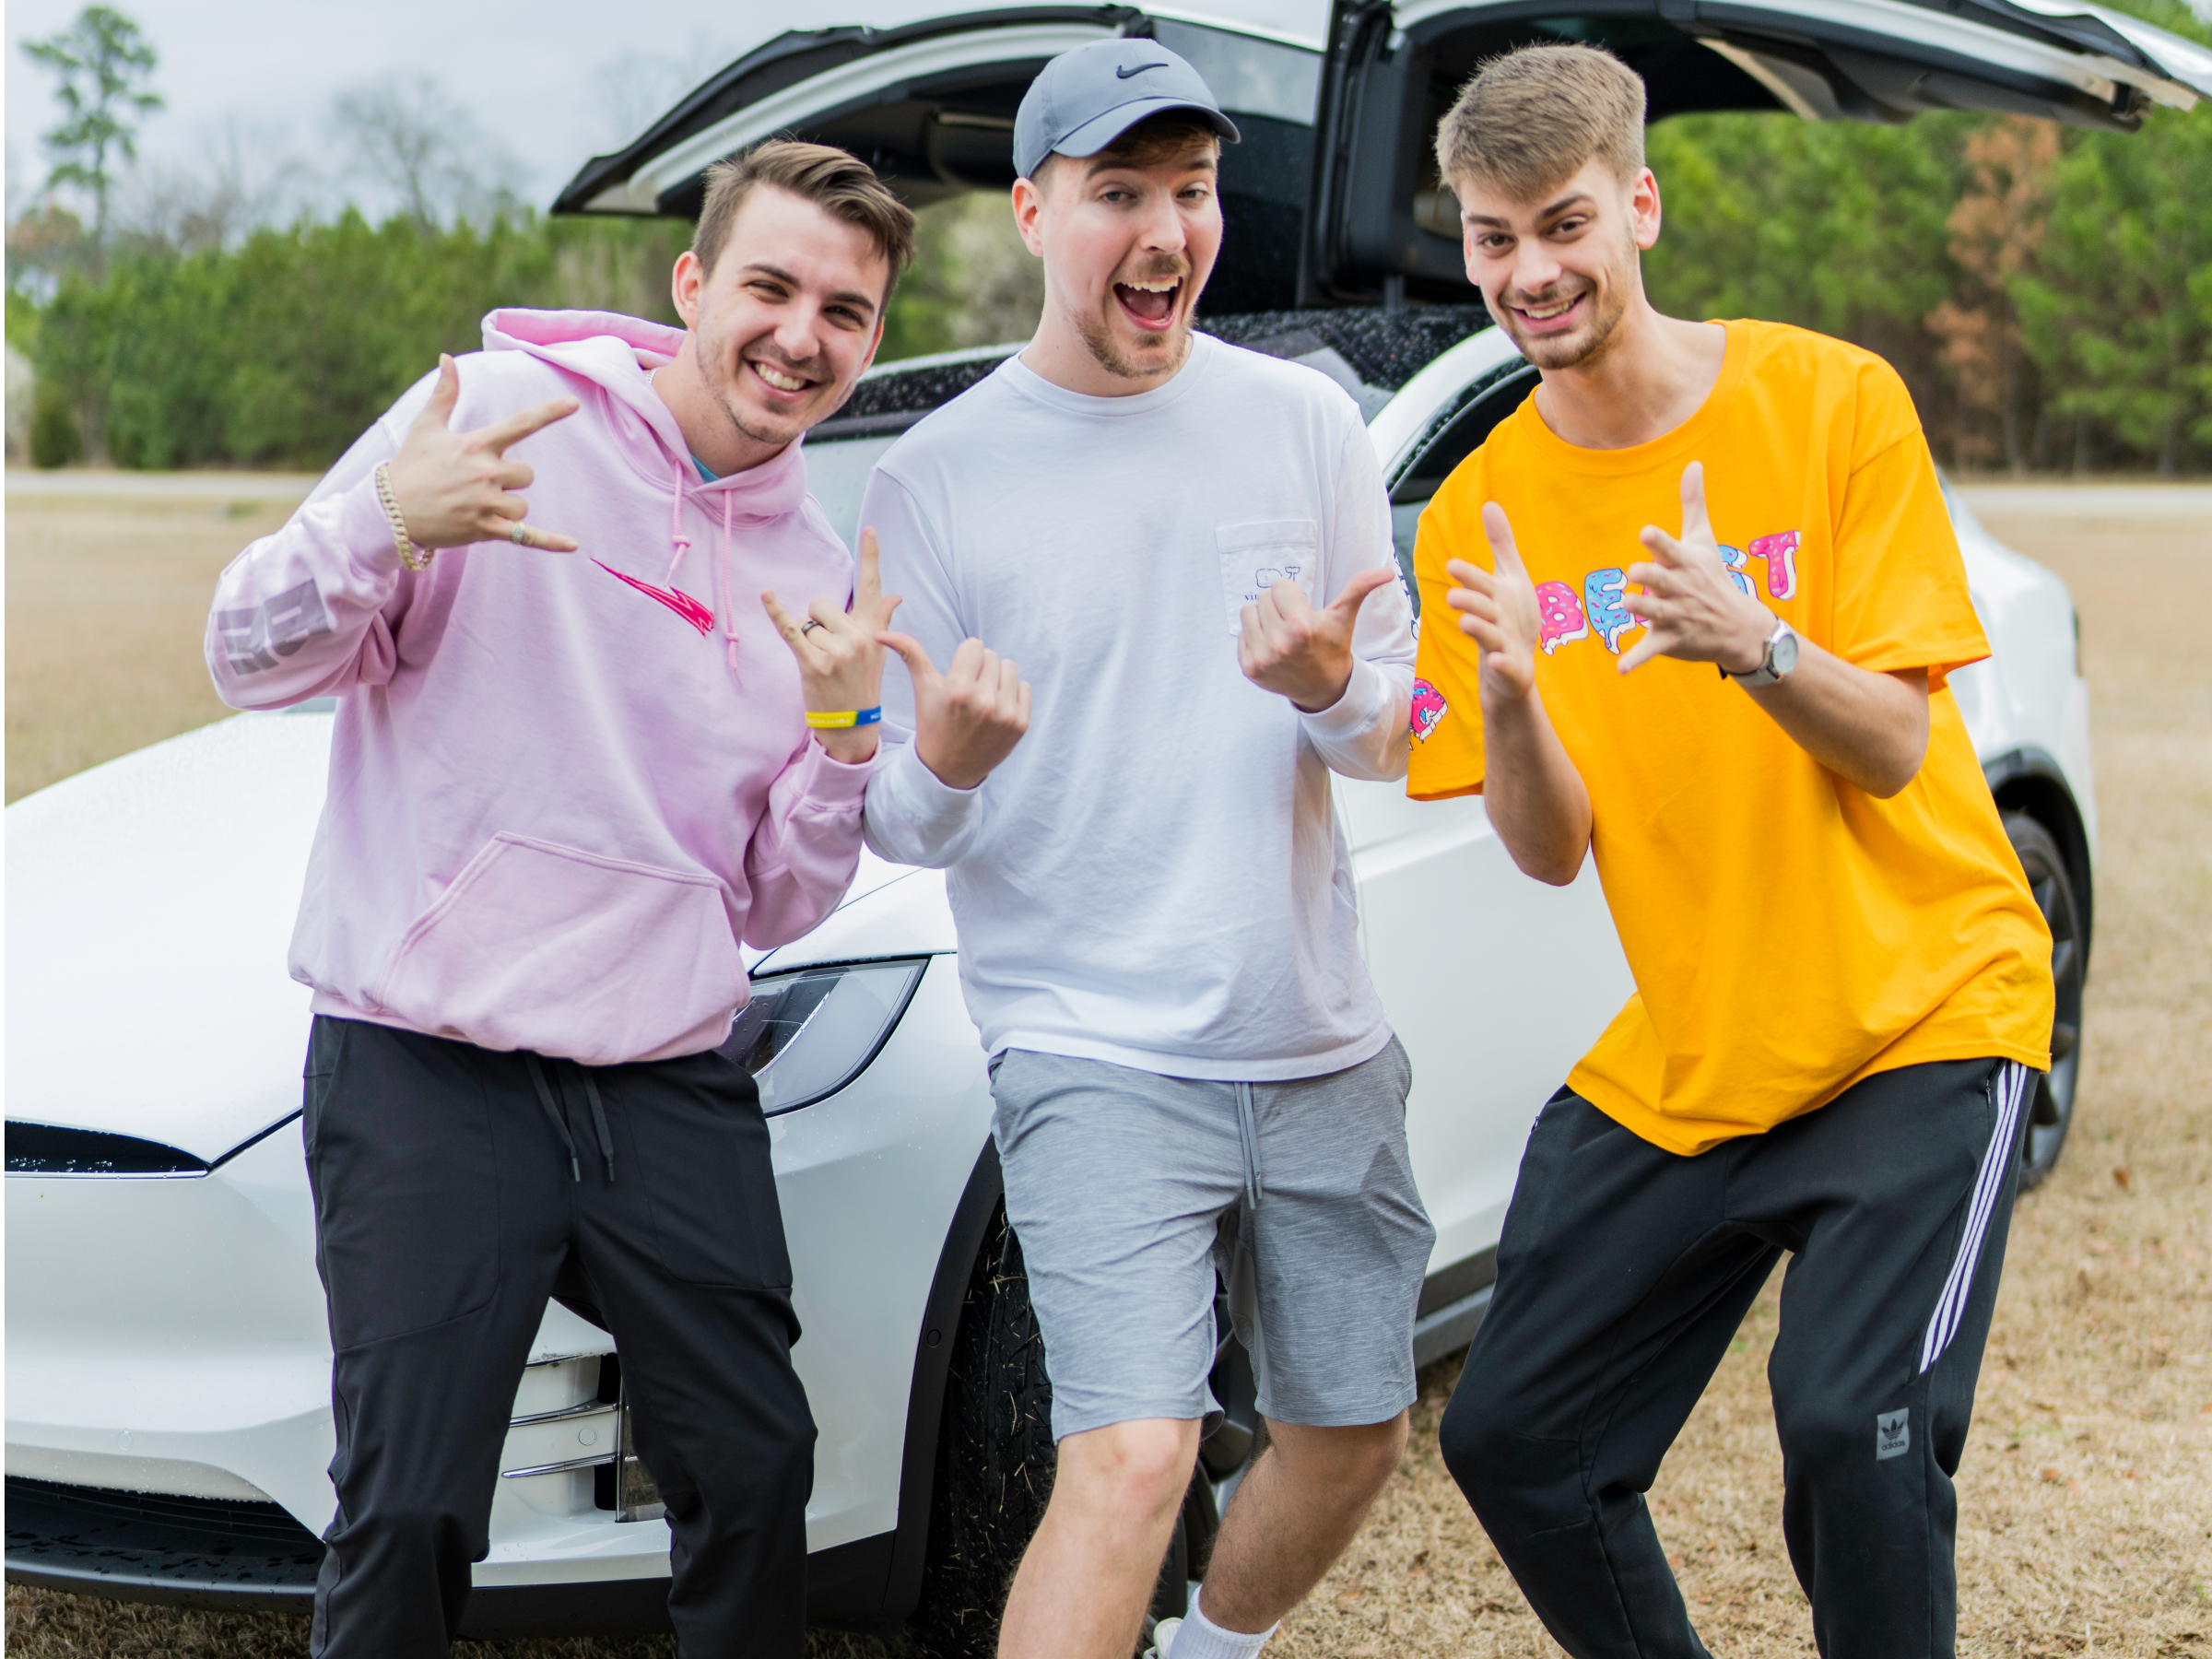 of MrBeast's childhood friends explain what it's like to work on the YouTube star's team from dropping $60000 on a video to going. Mr. beast, Mr., Youtube stars